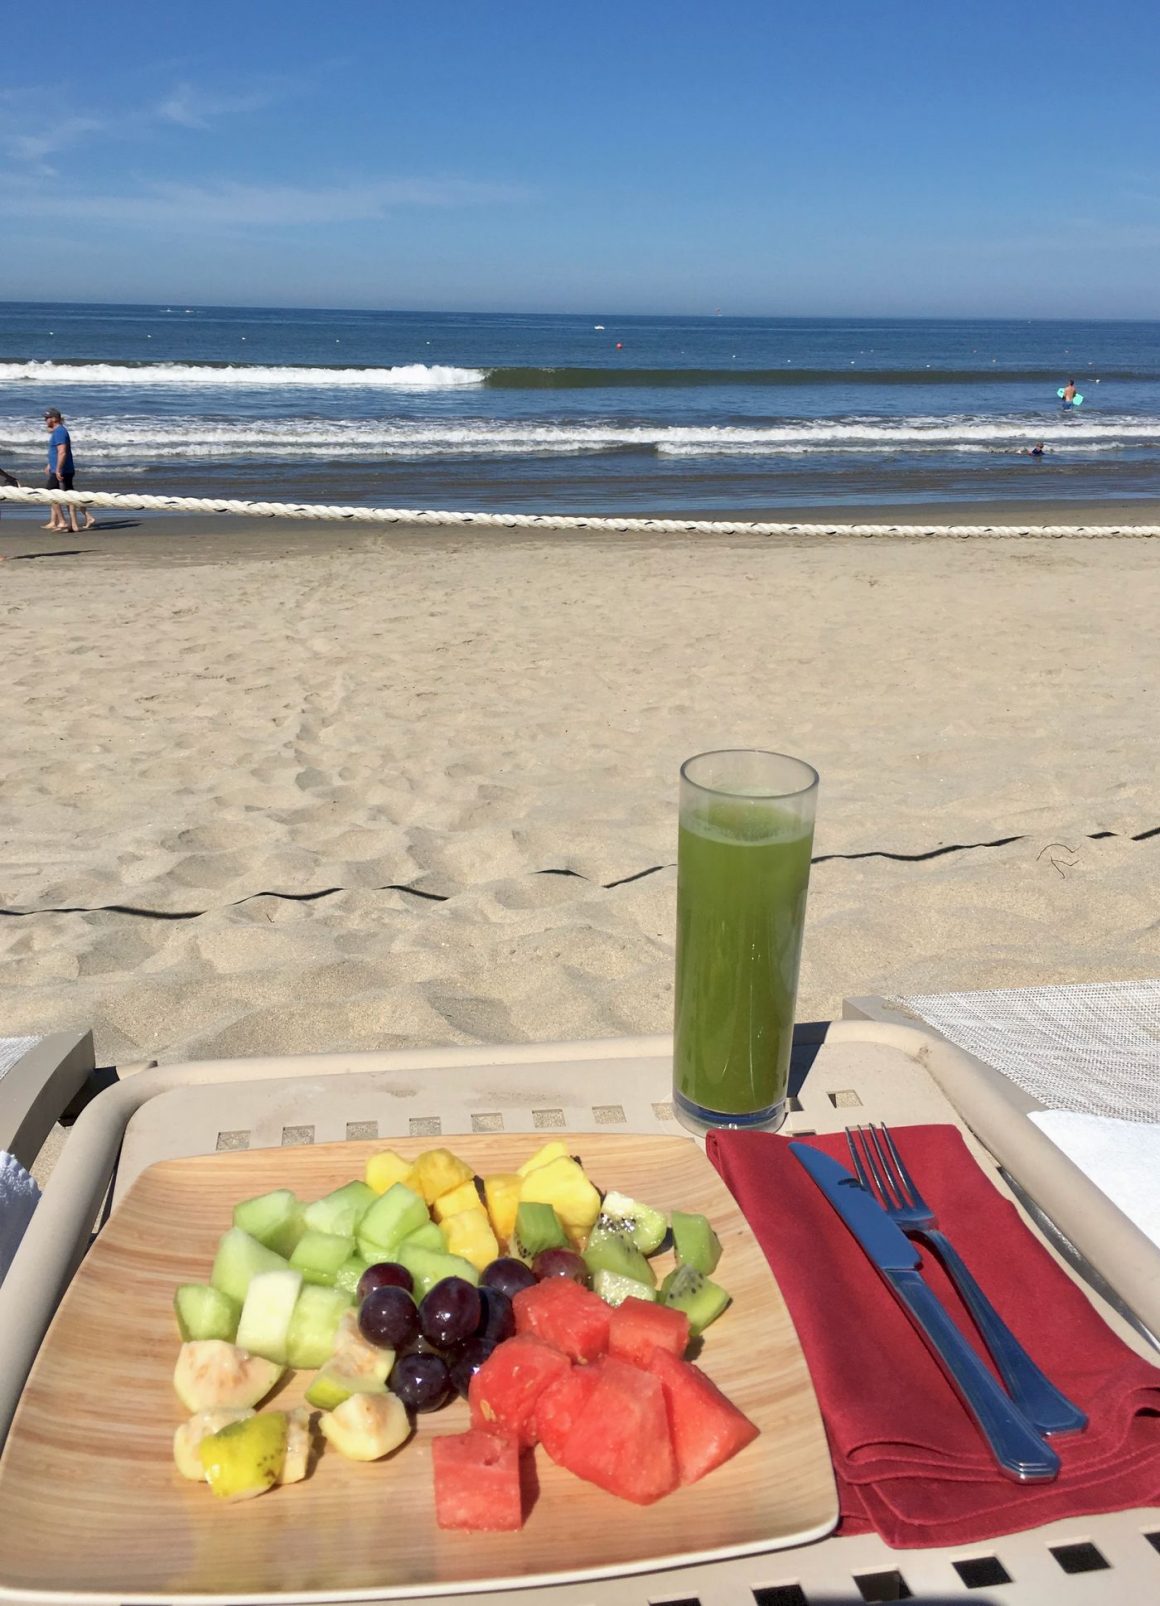 Fresh fruit in Mexico - How To Stay Healthy While Traveling